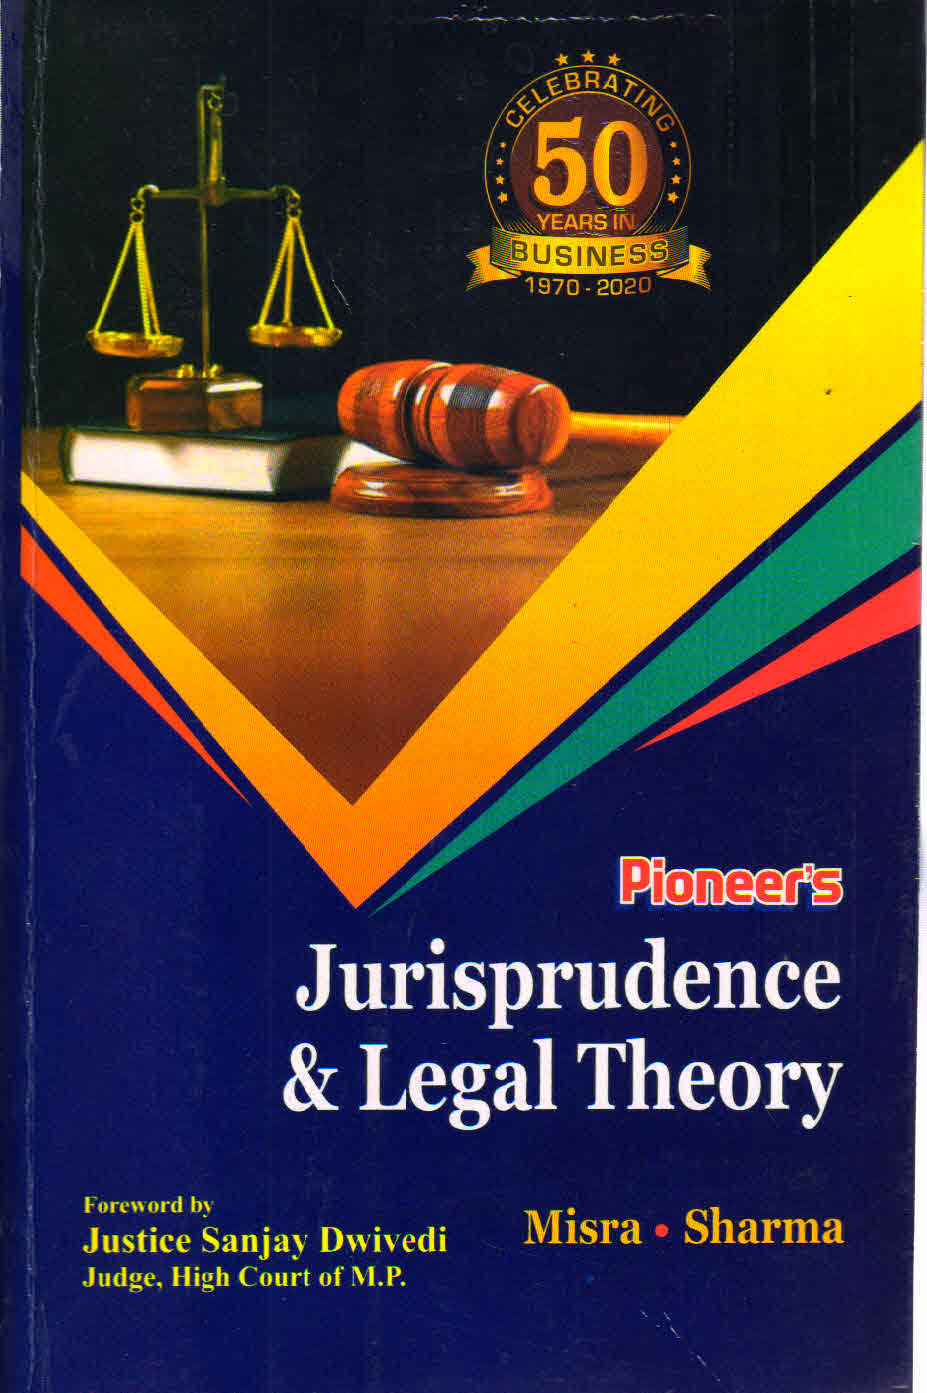 legal writing and research in jurisprudence